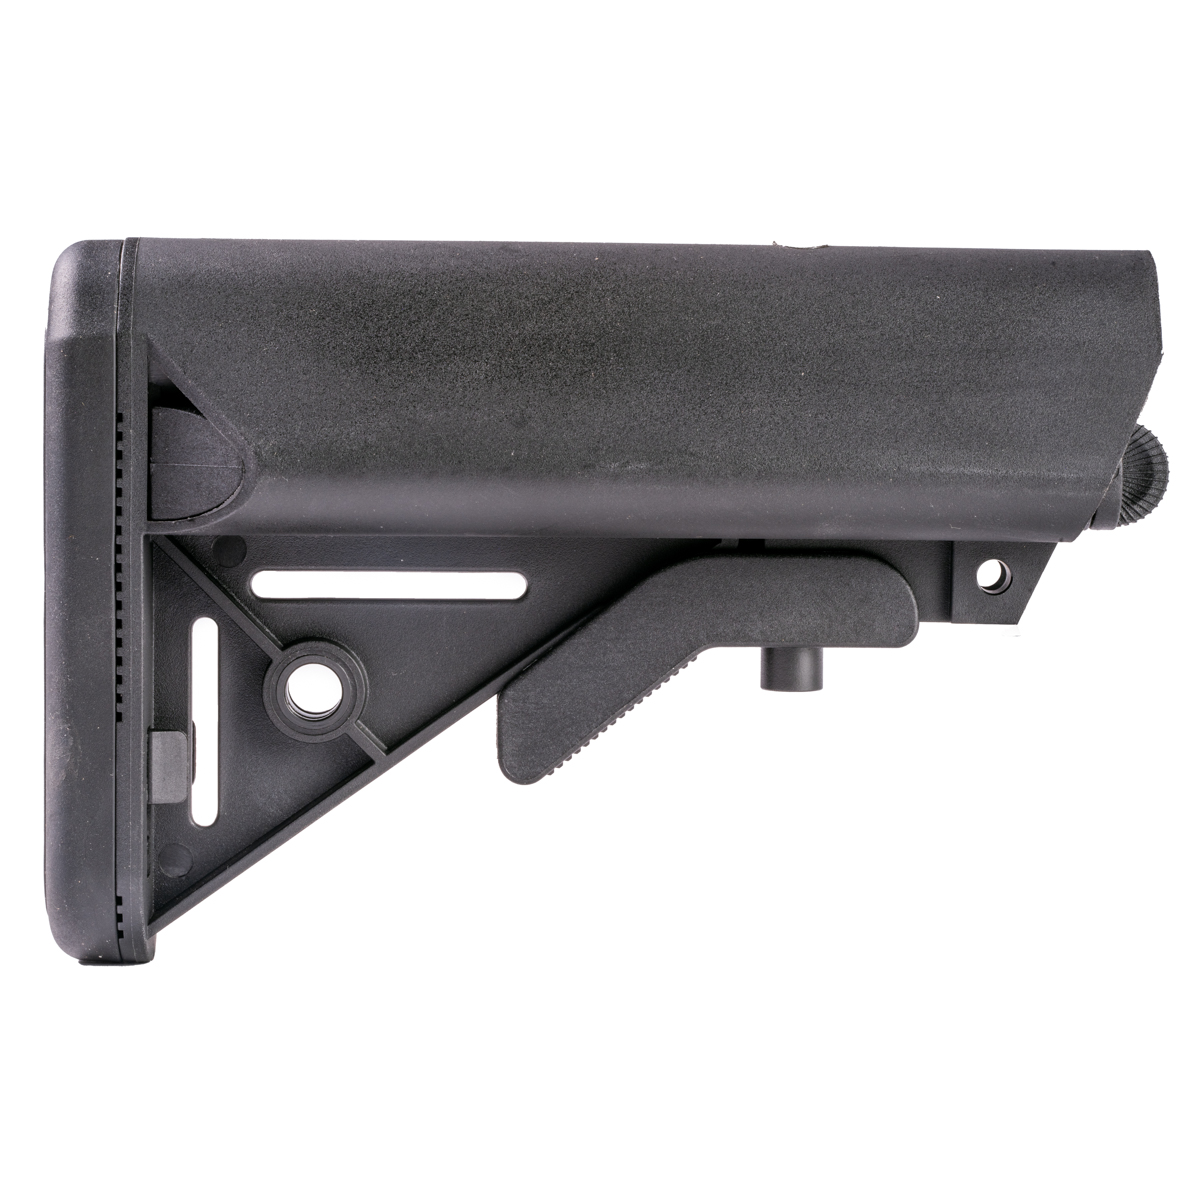 Gauntlet Arms SOPMOD Stock with Storage Compartments